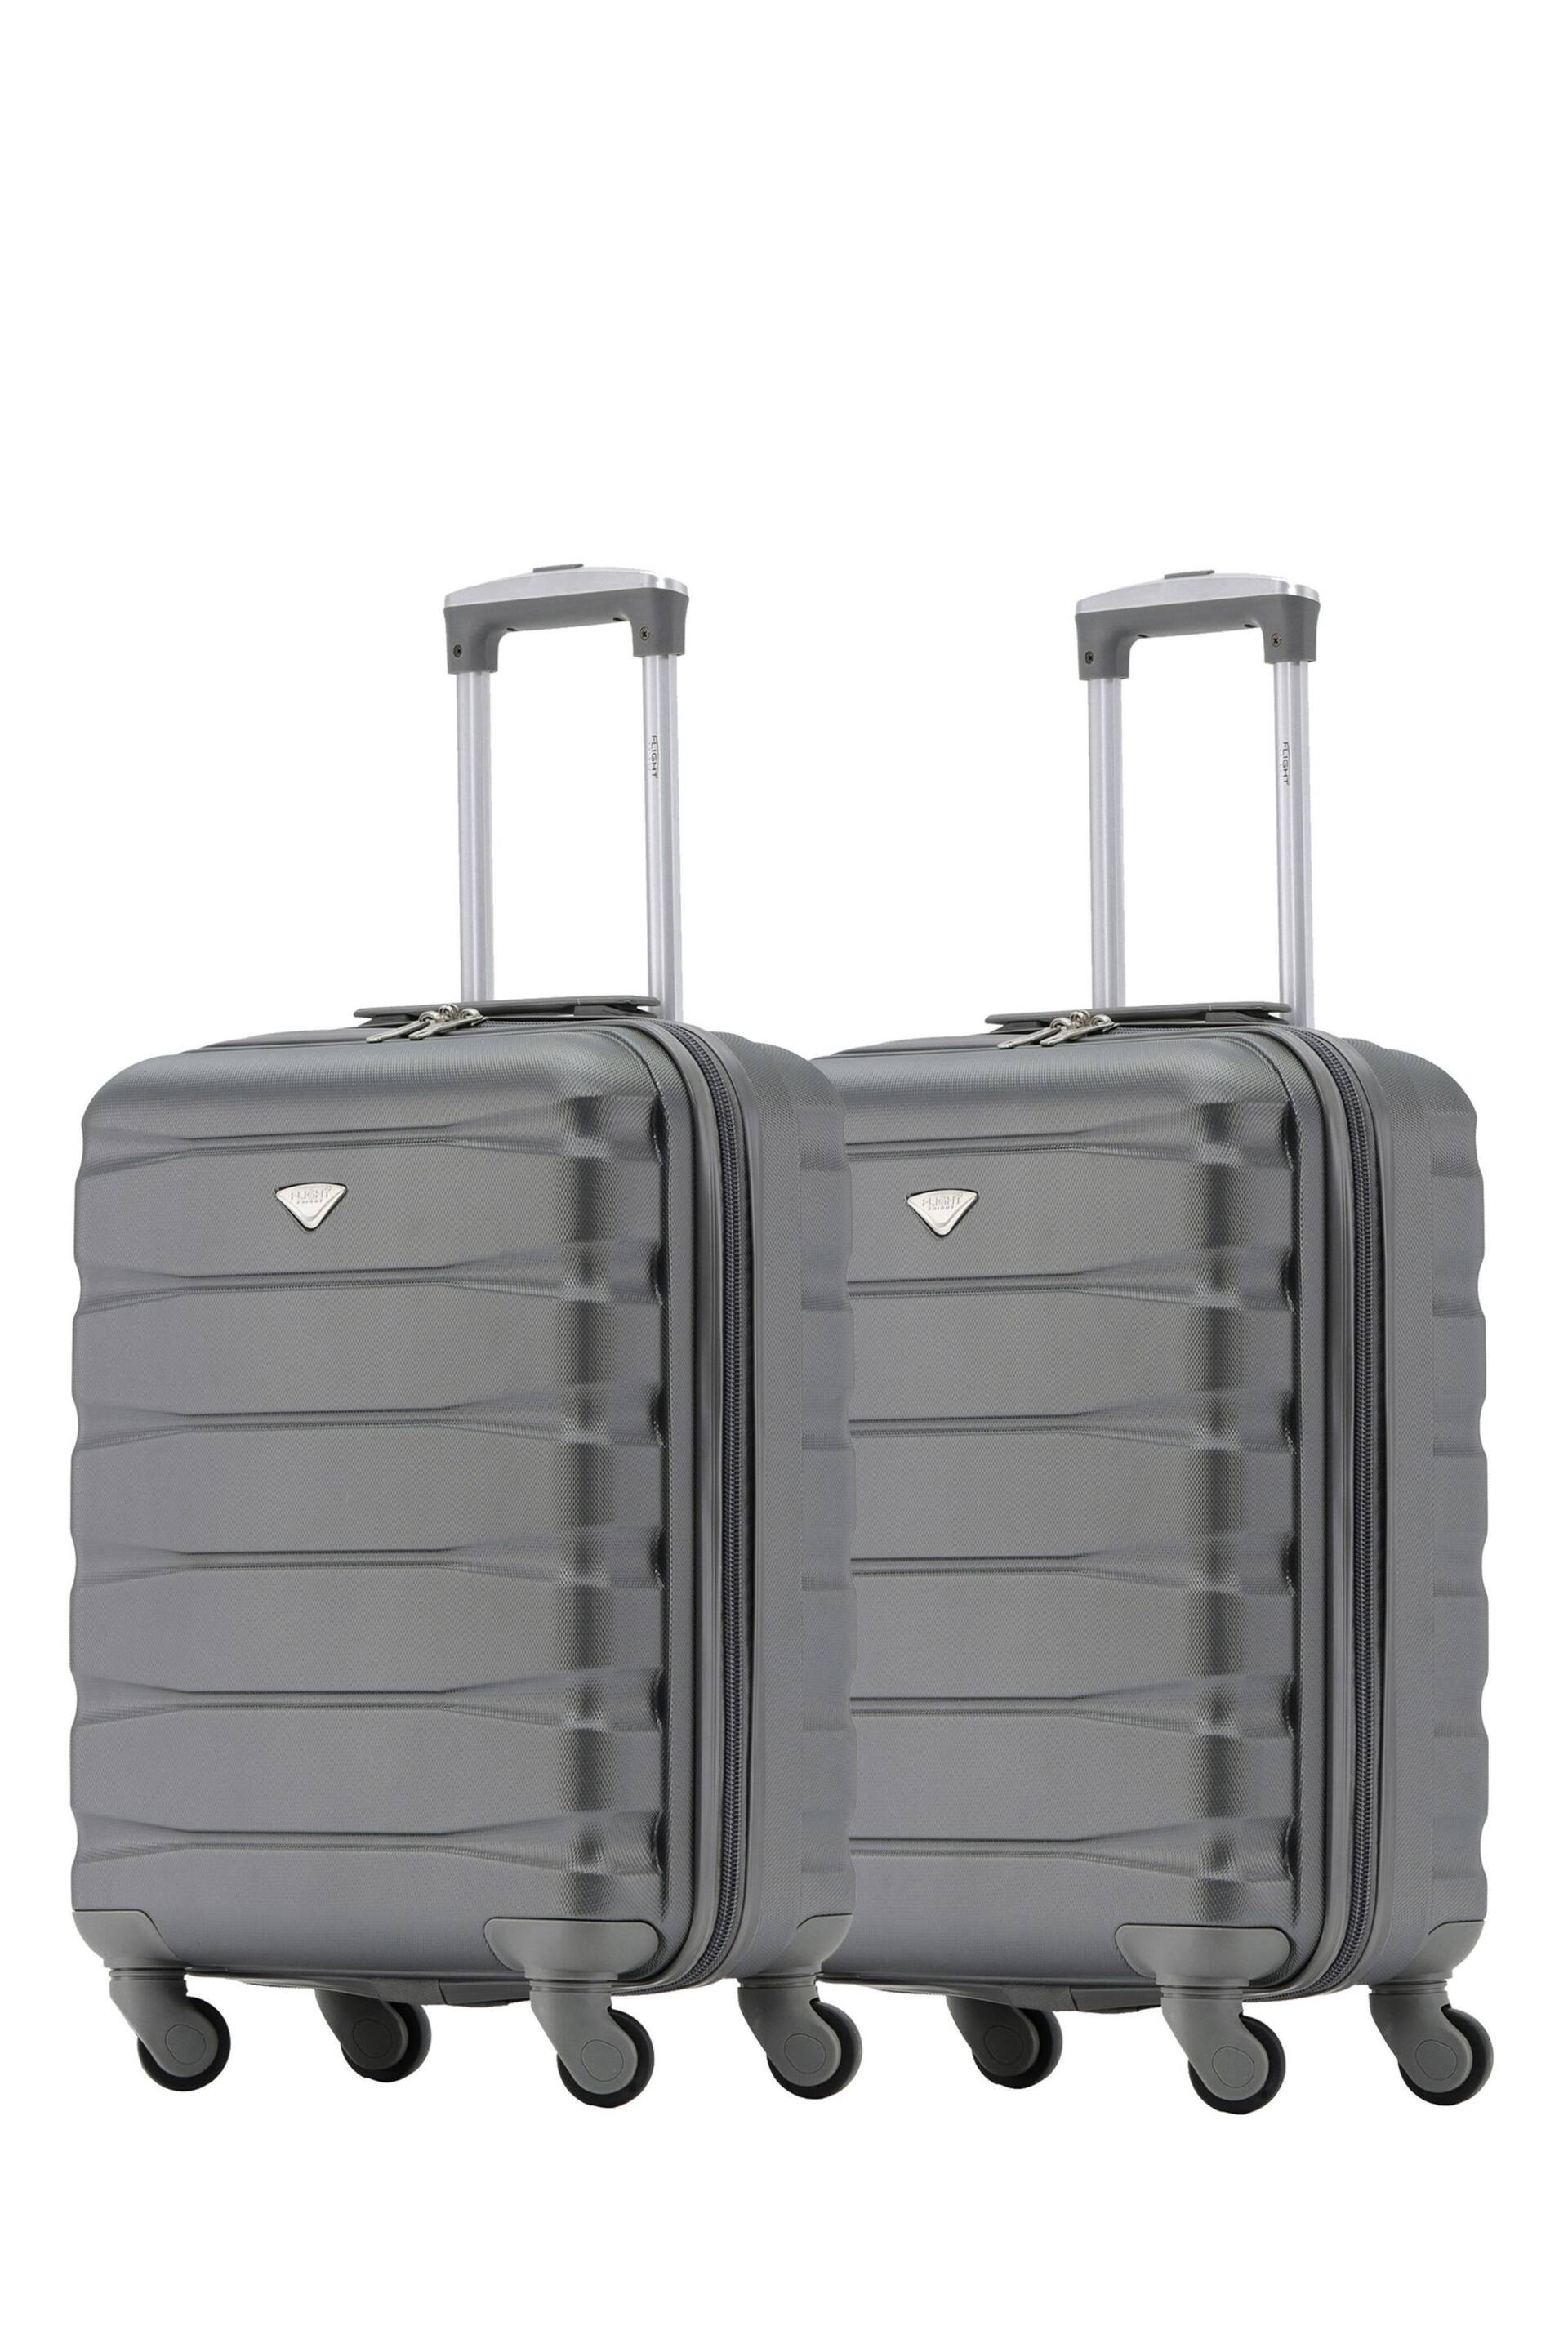 Flight Knight Ryanair Priority 4 Wheel ABS Hard Case Cabin Carry On Suitcase 55x40x20cm  Set Of 2 - Image 3 of 10